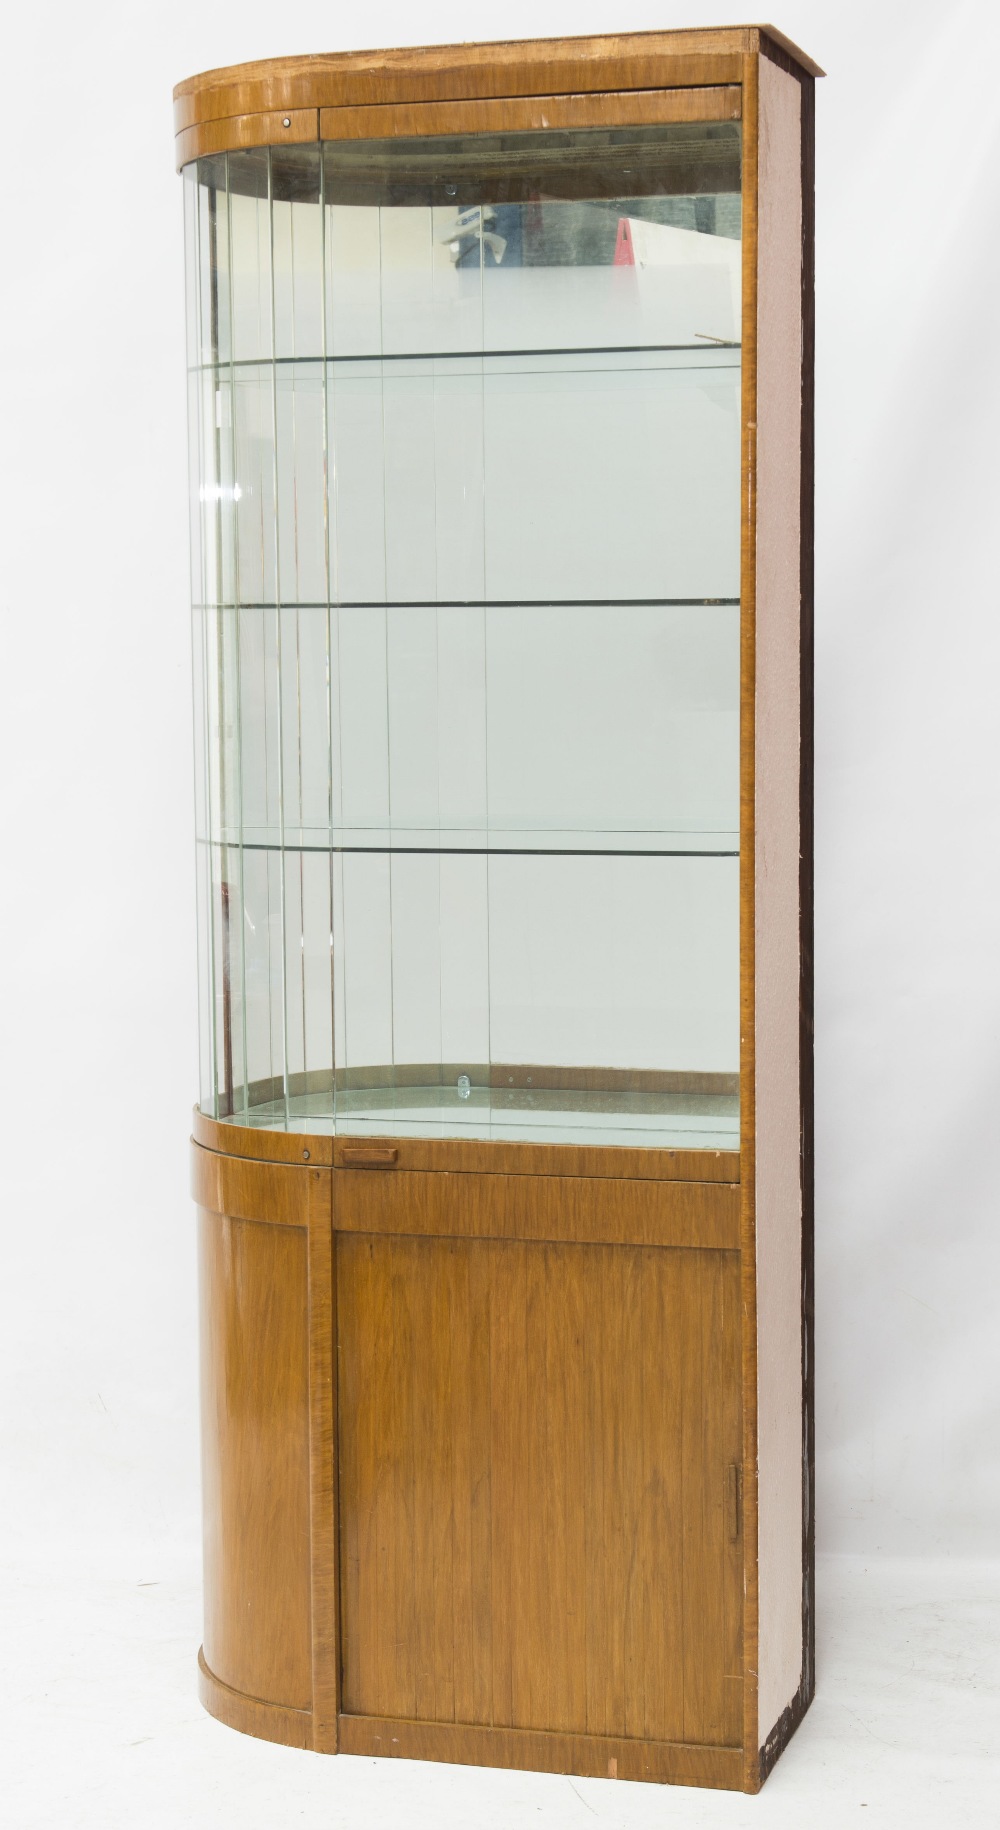 A mirror-backed glazed shop display cabinet with tambour door.